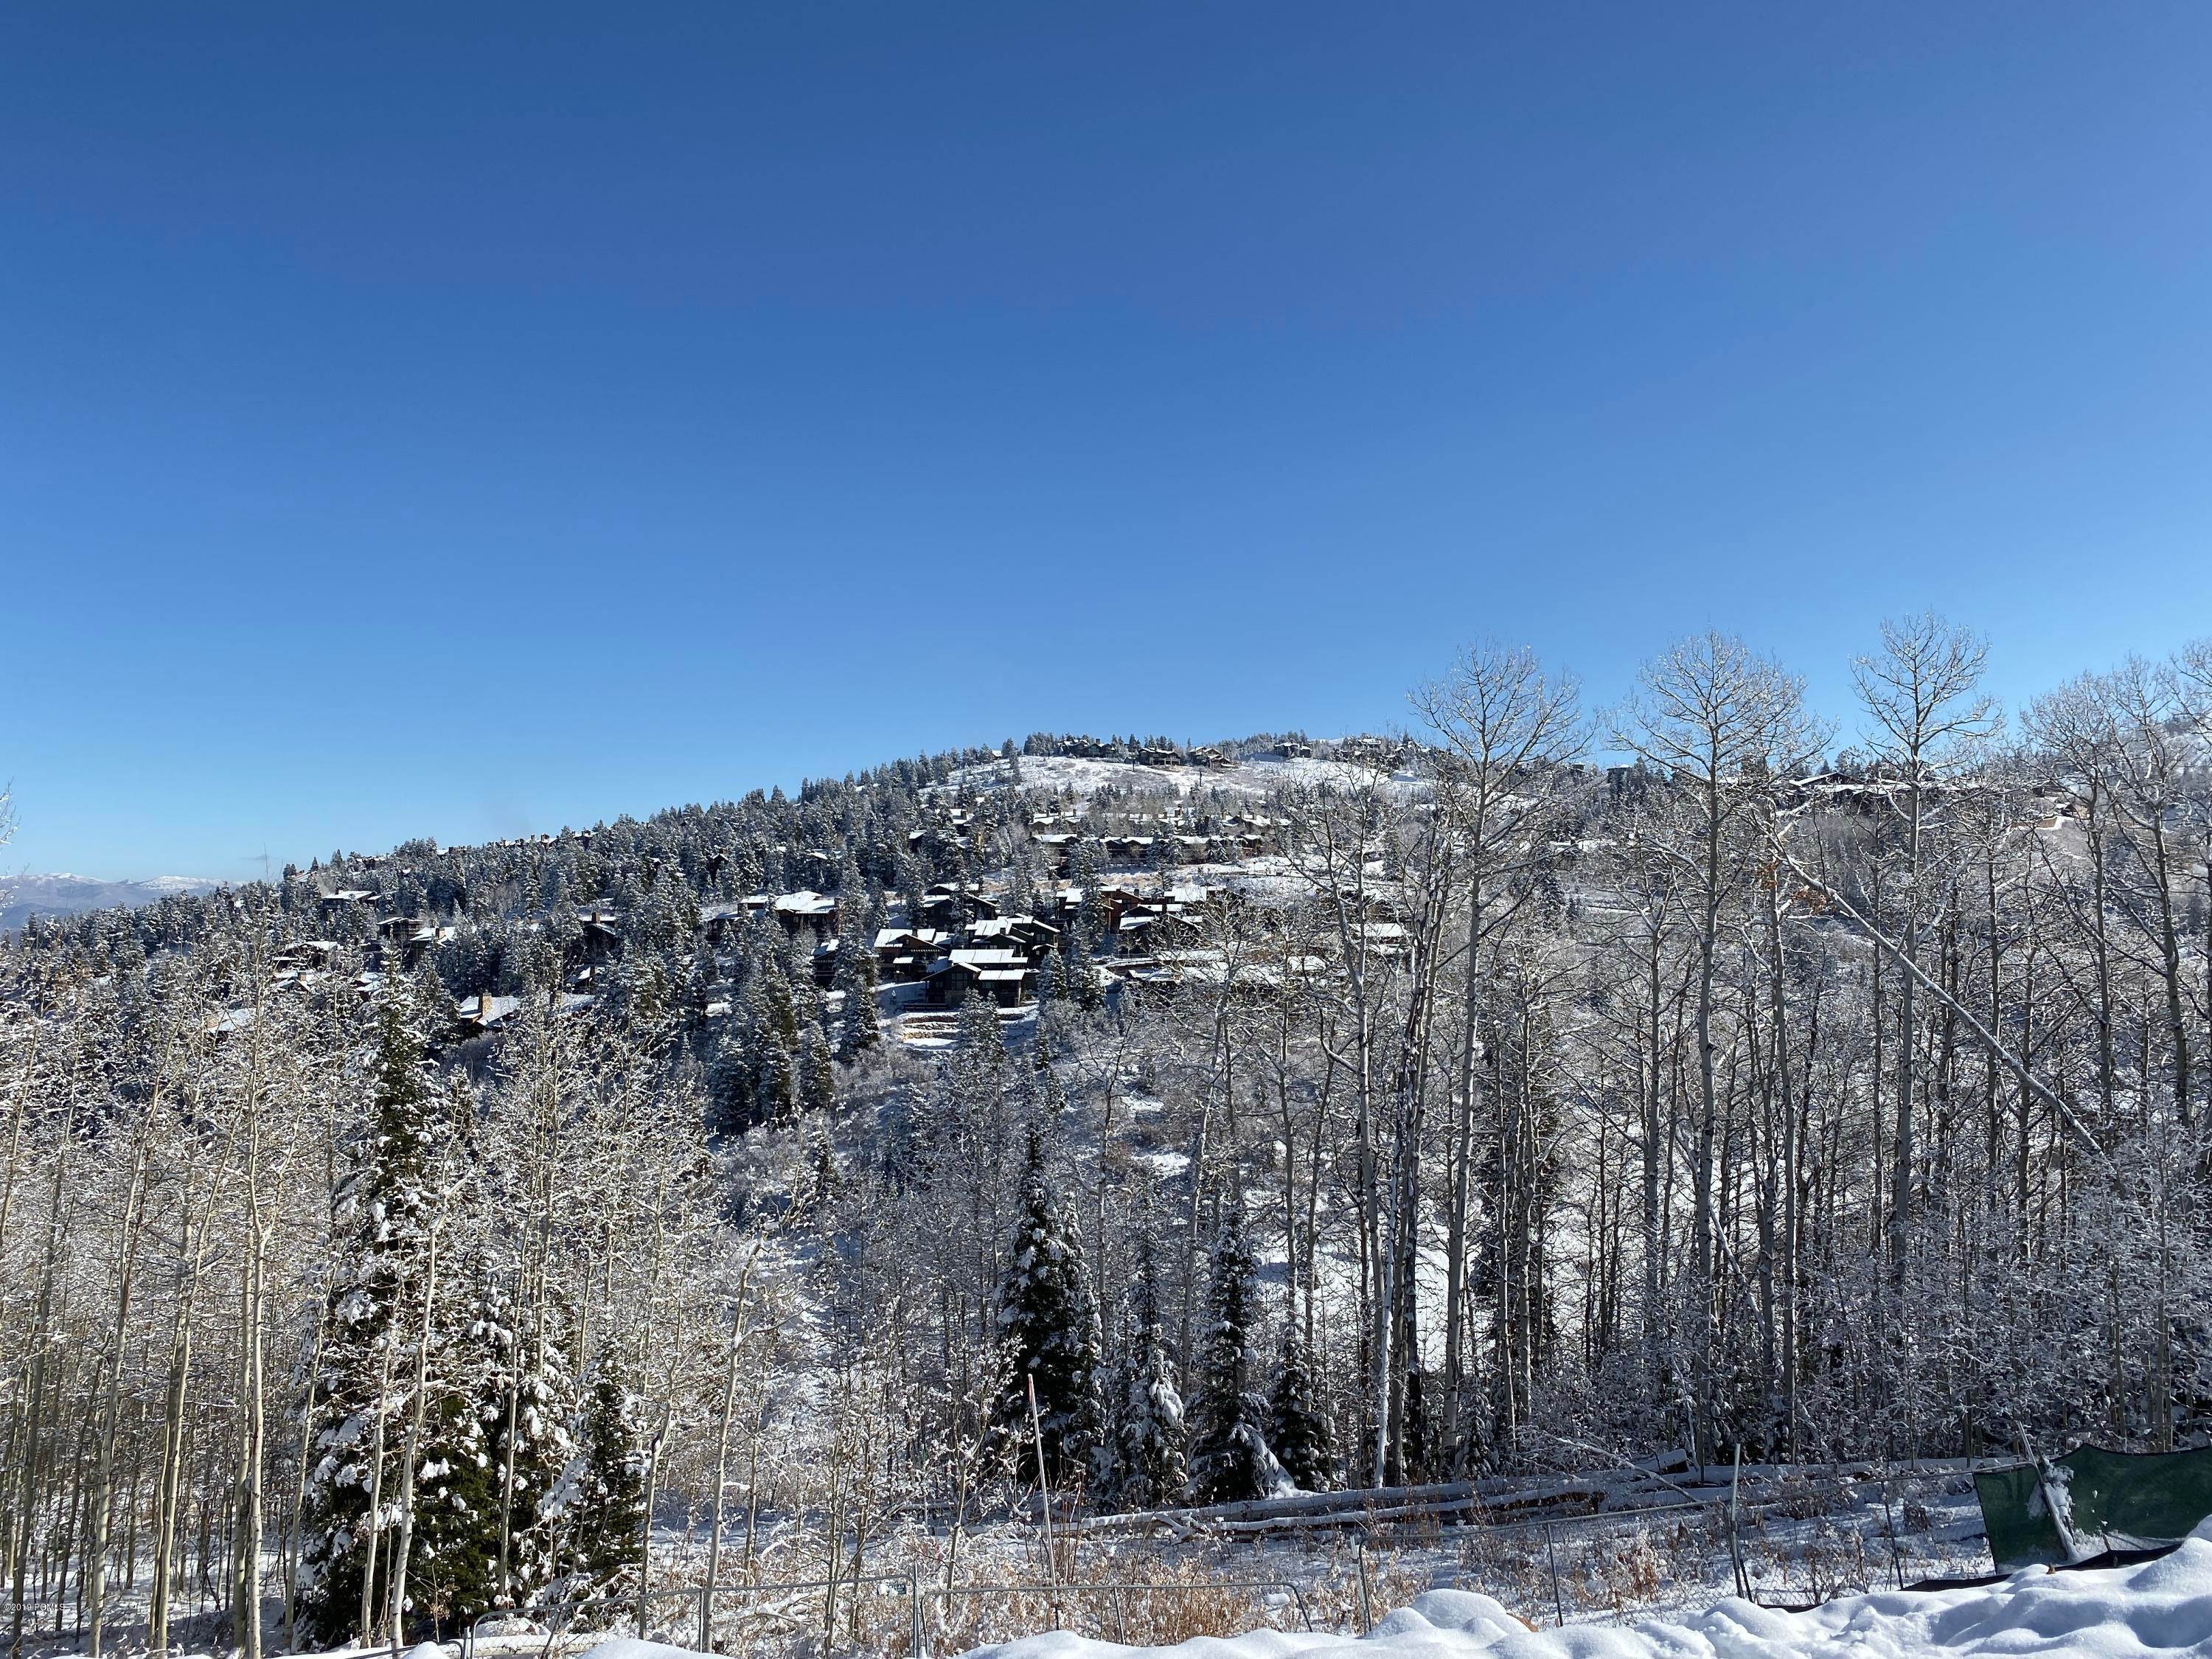 Residential Lots & Land for Sale at 8945 Marsac Avenue #A Park City, Utah 84098 United States